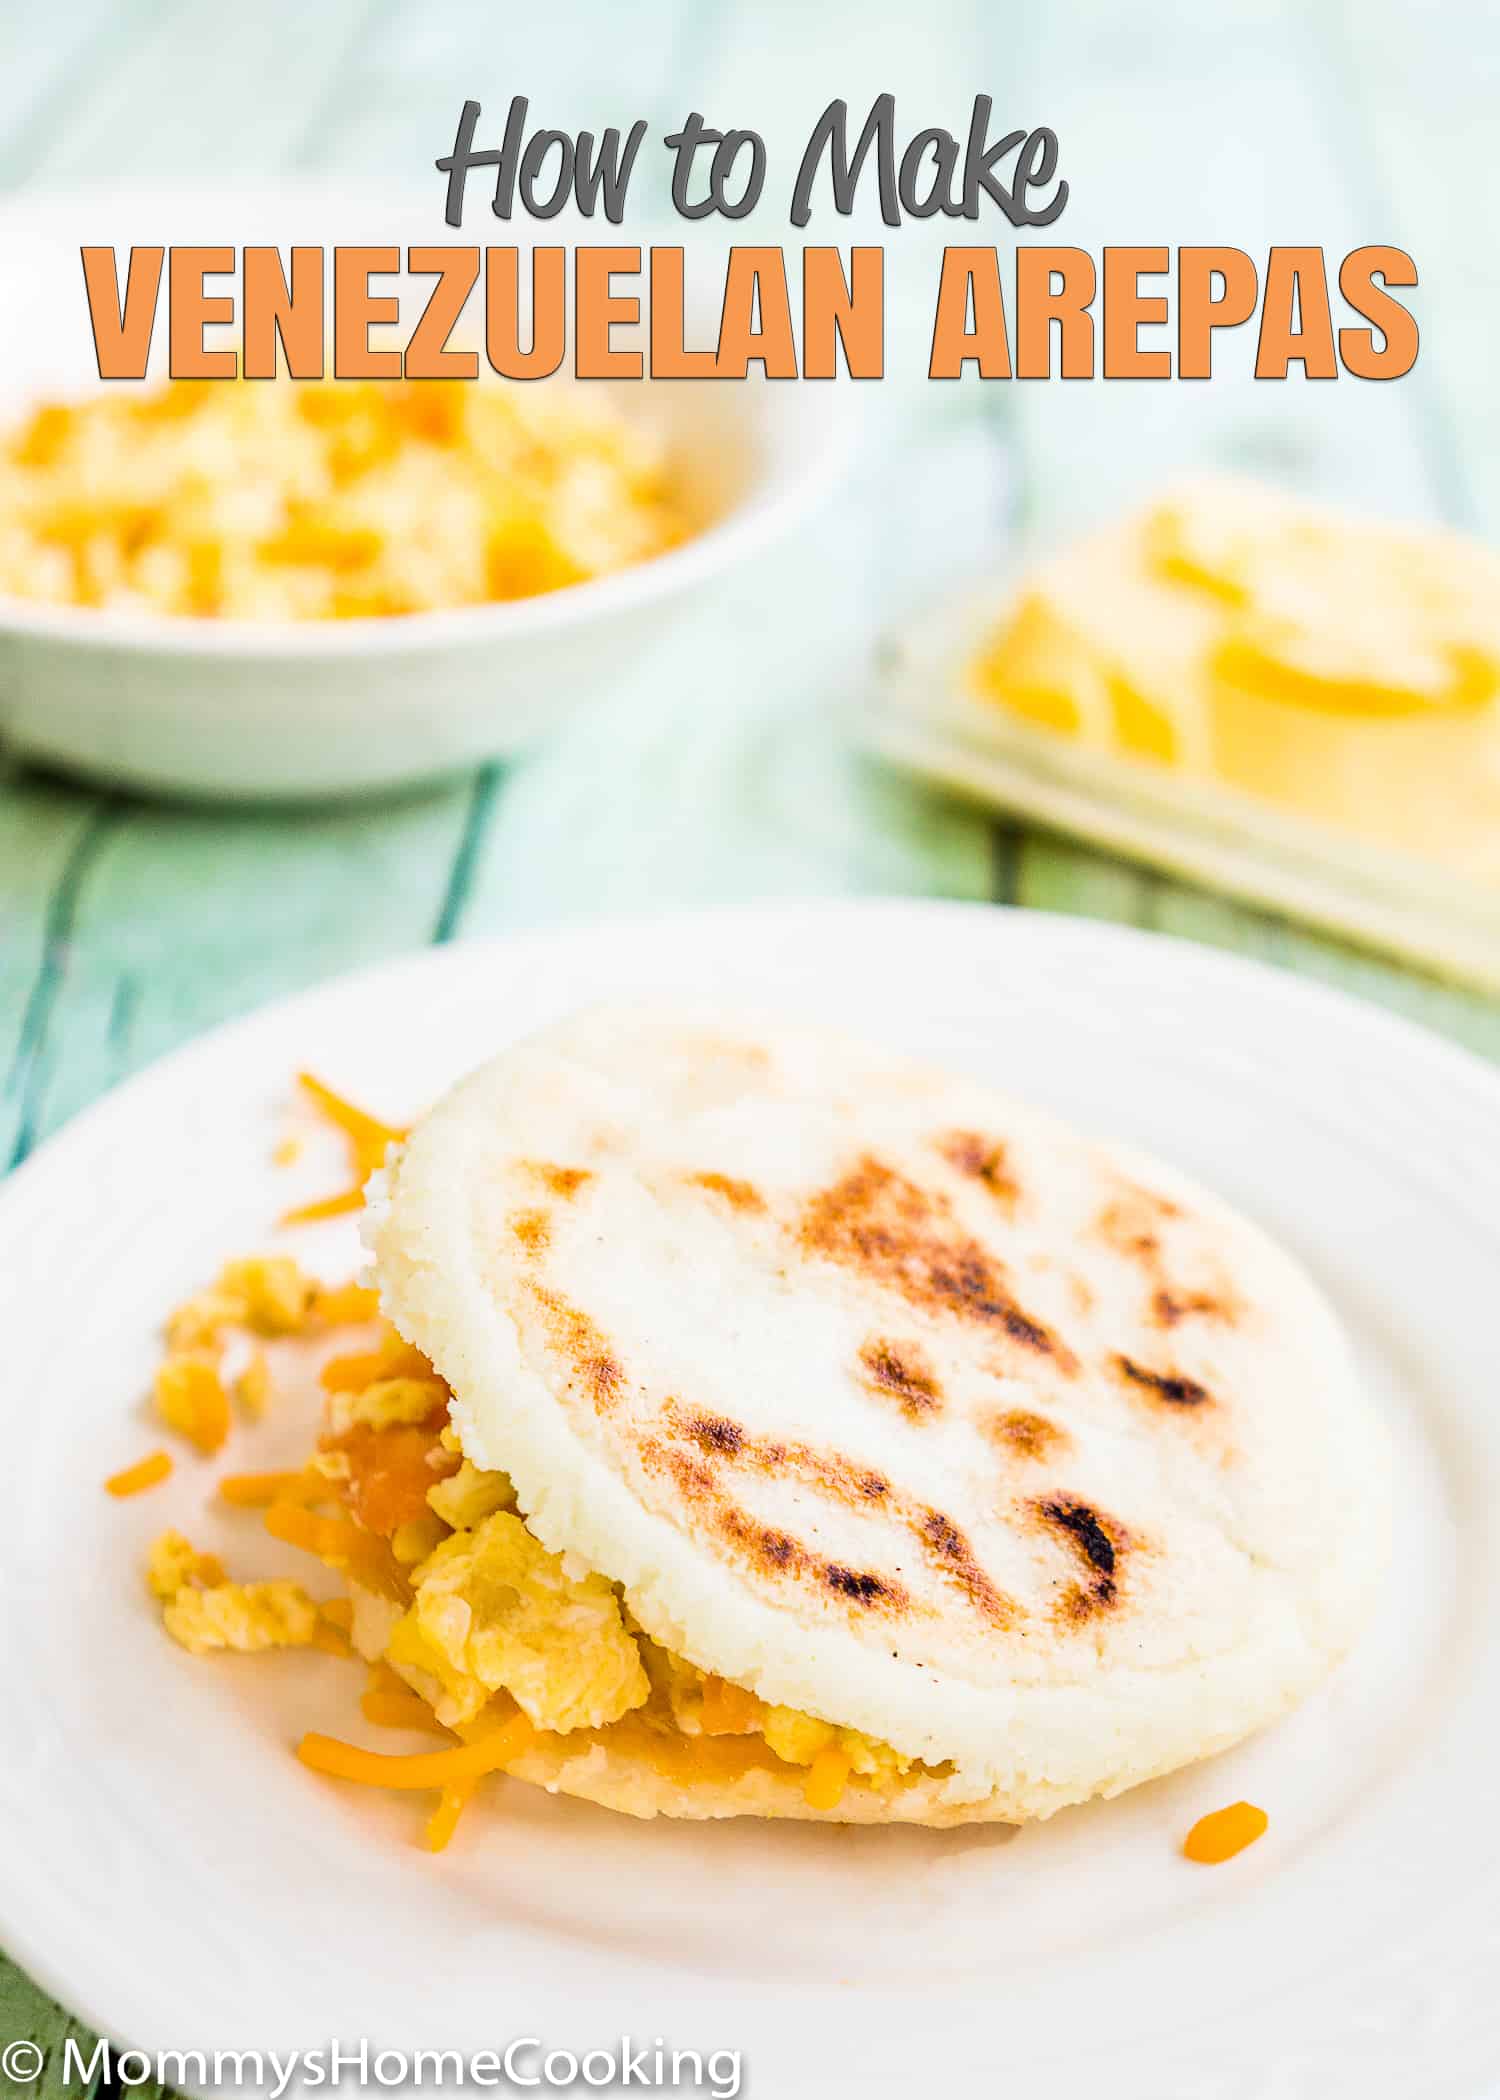 Learn How to Make Venezuelan Arepas and open a world of delicious food possibilities for your family!! These flat patty made of maize flour are sooo yummy and so easy to make. Fill them with chicken salad, tuna, pulled pork, beef, cheese, ham, eggs... the possibilities are endless. https://mommyshomecooking.com